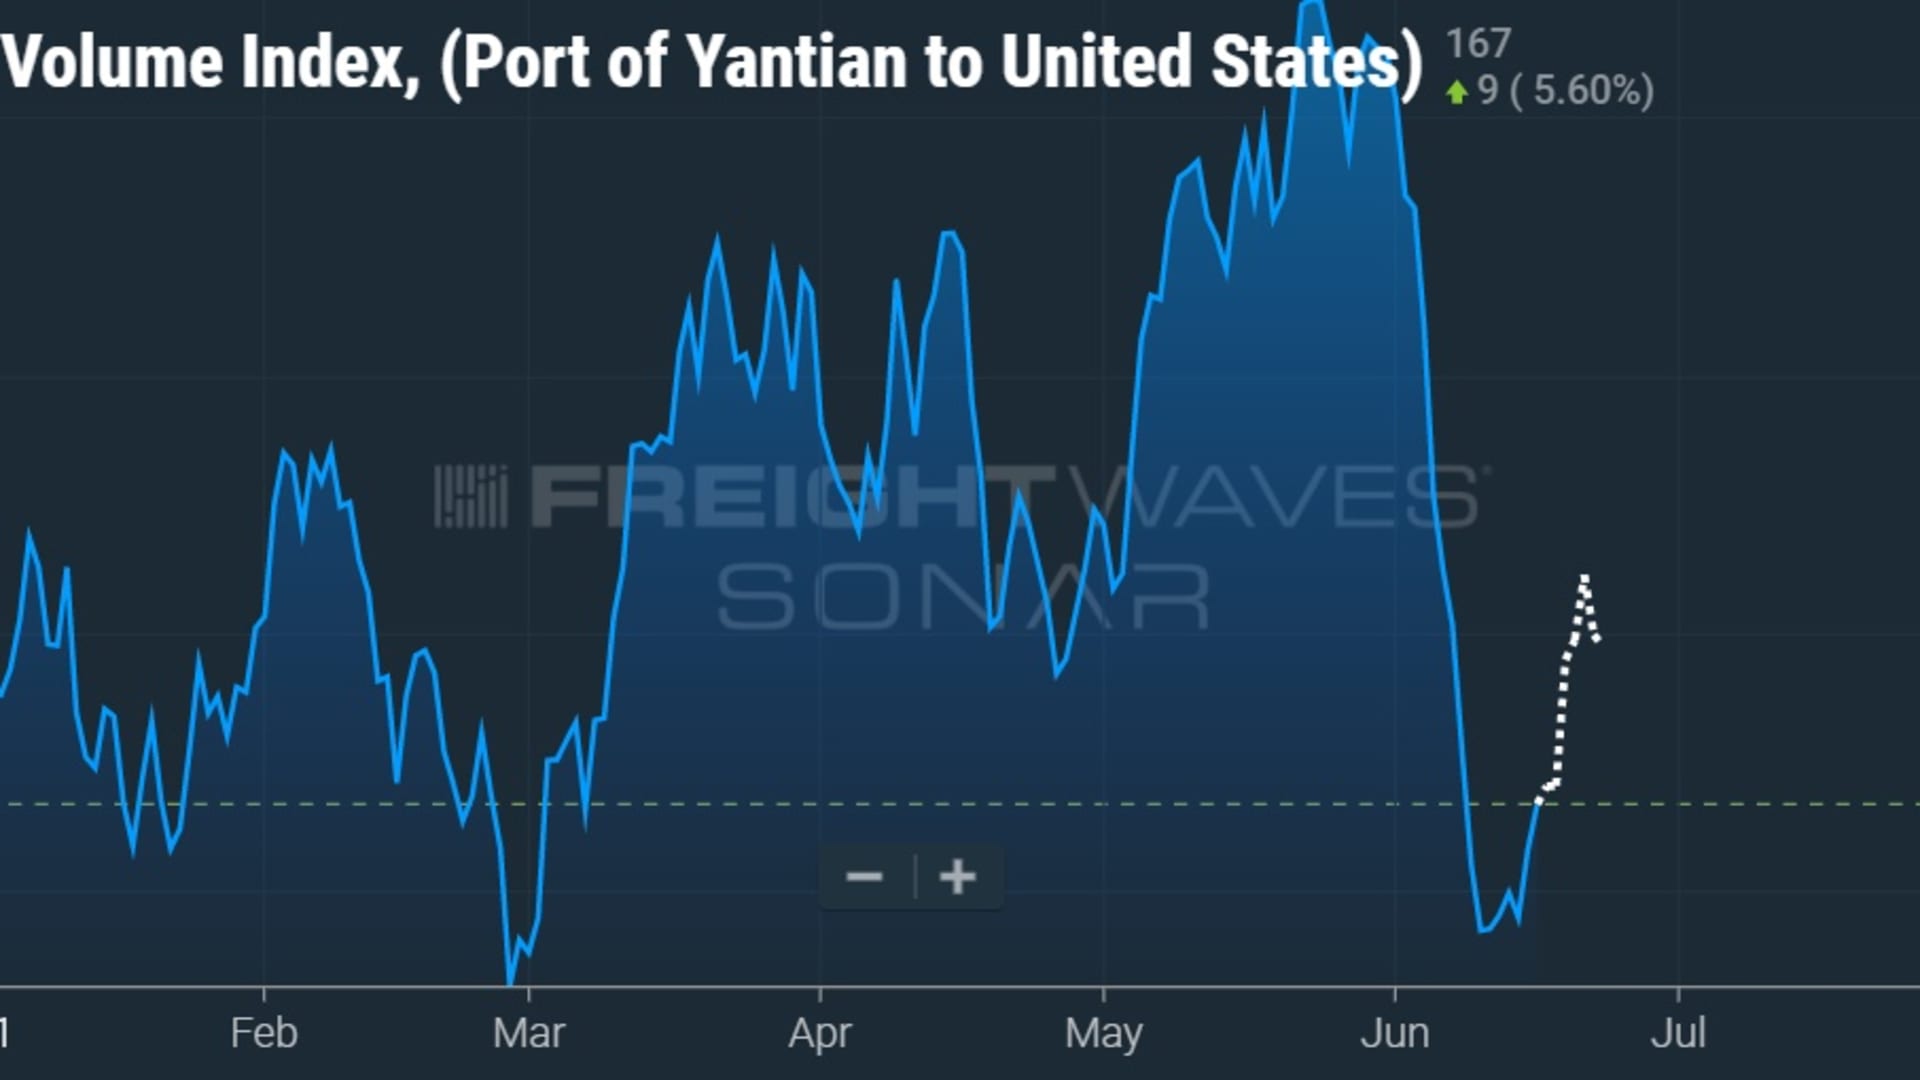 Inbound Ocean TEUs Volume Index. FreightWaves SONAR data for the Port of Yantian shows the tremendous number of TEUs that arrive at U.S. ports weekly. The dotted line shows the incoming containers.